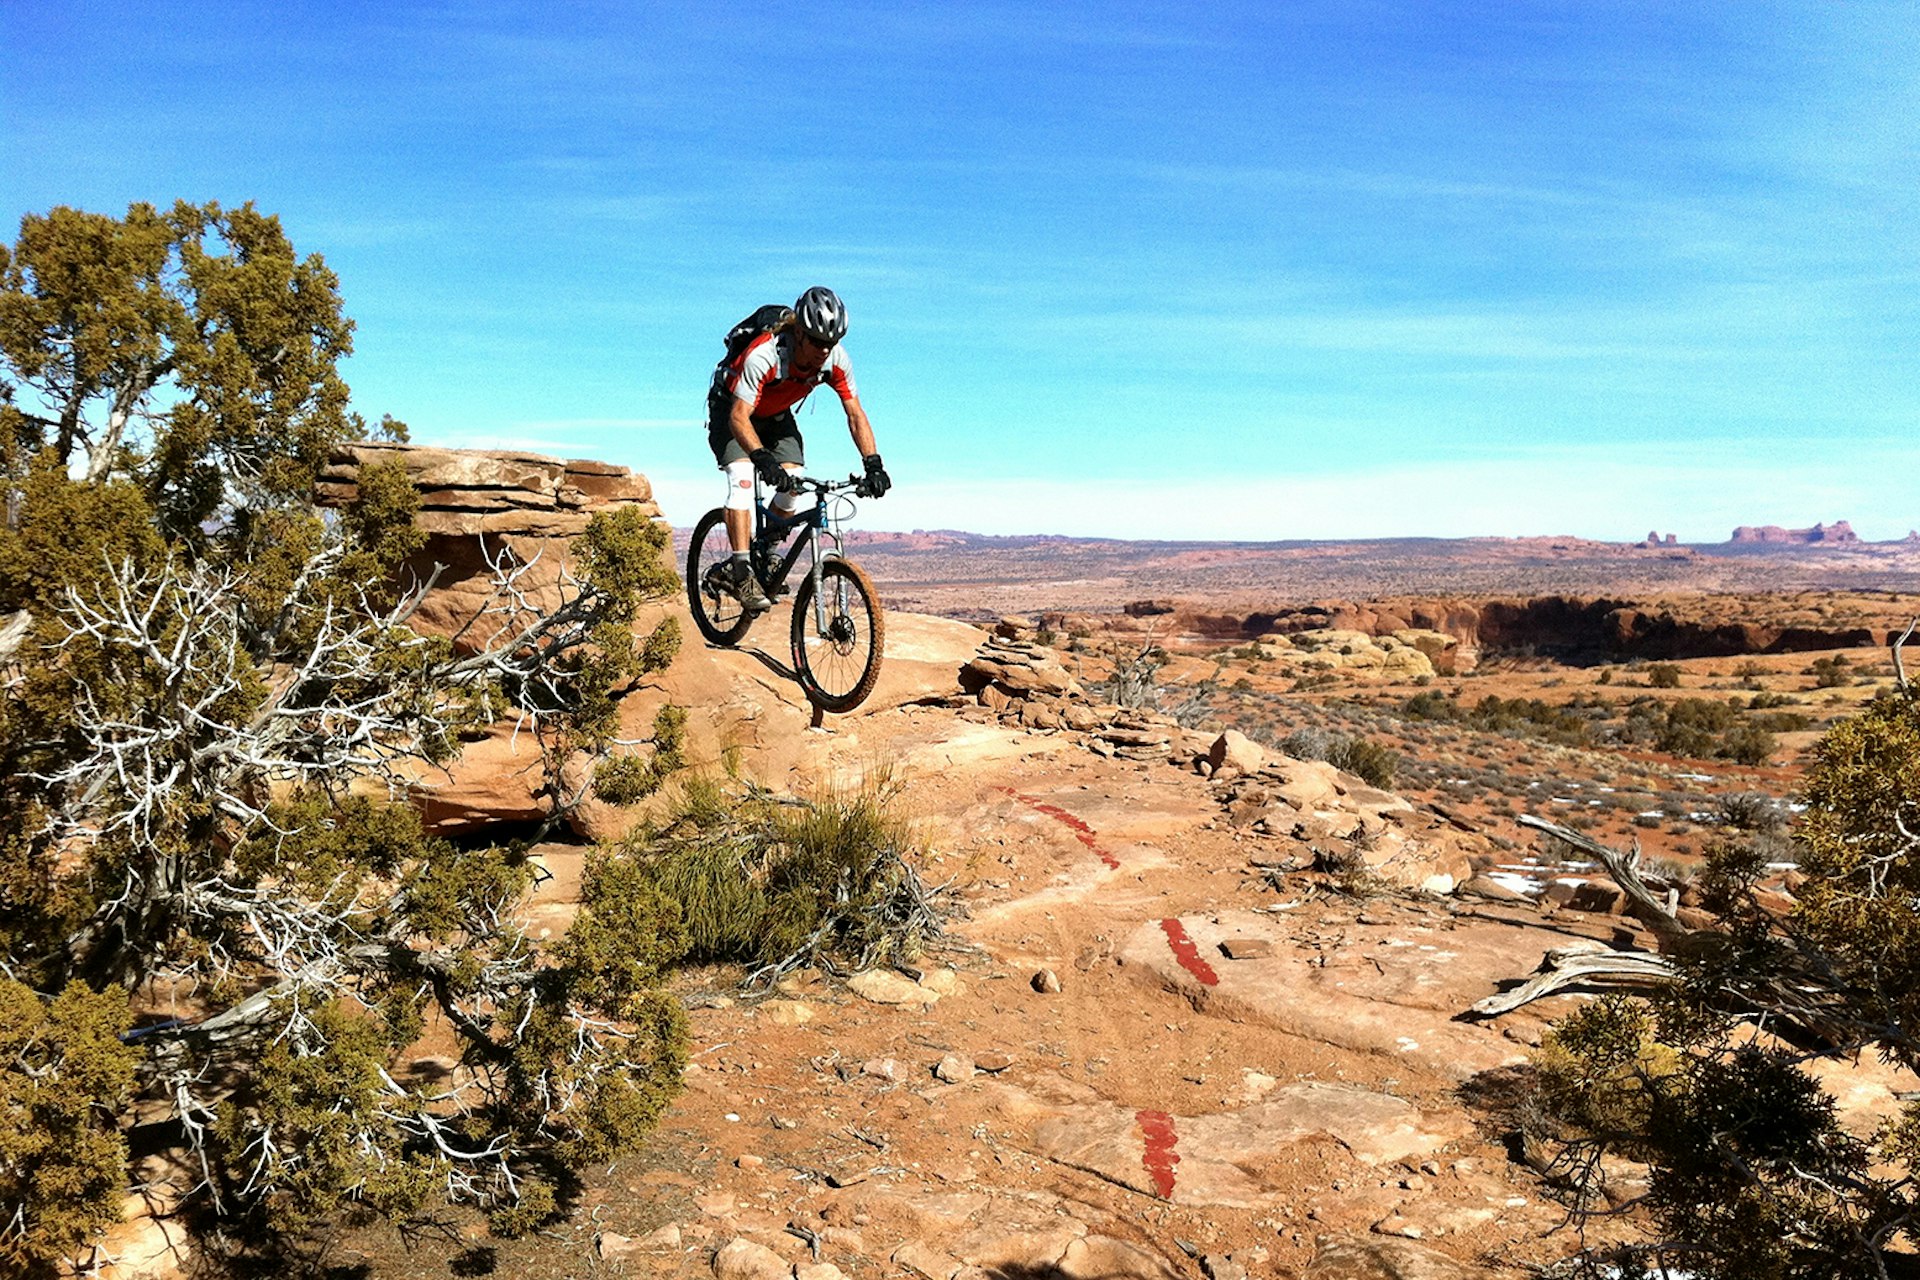 A mountain biker on the Moab Brand Trails in Utah. Image by TRAILSOURCE.COM / CC BY 2.0